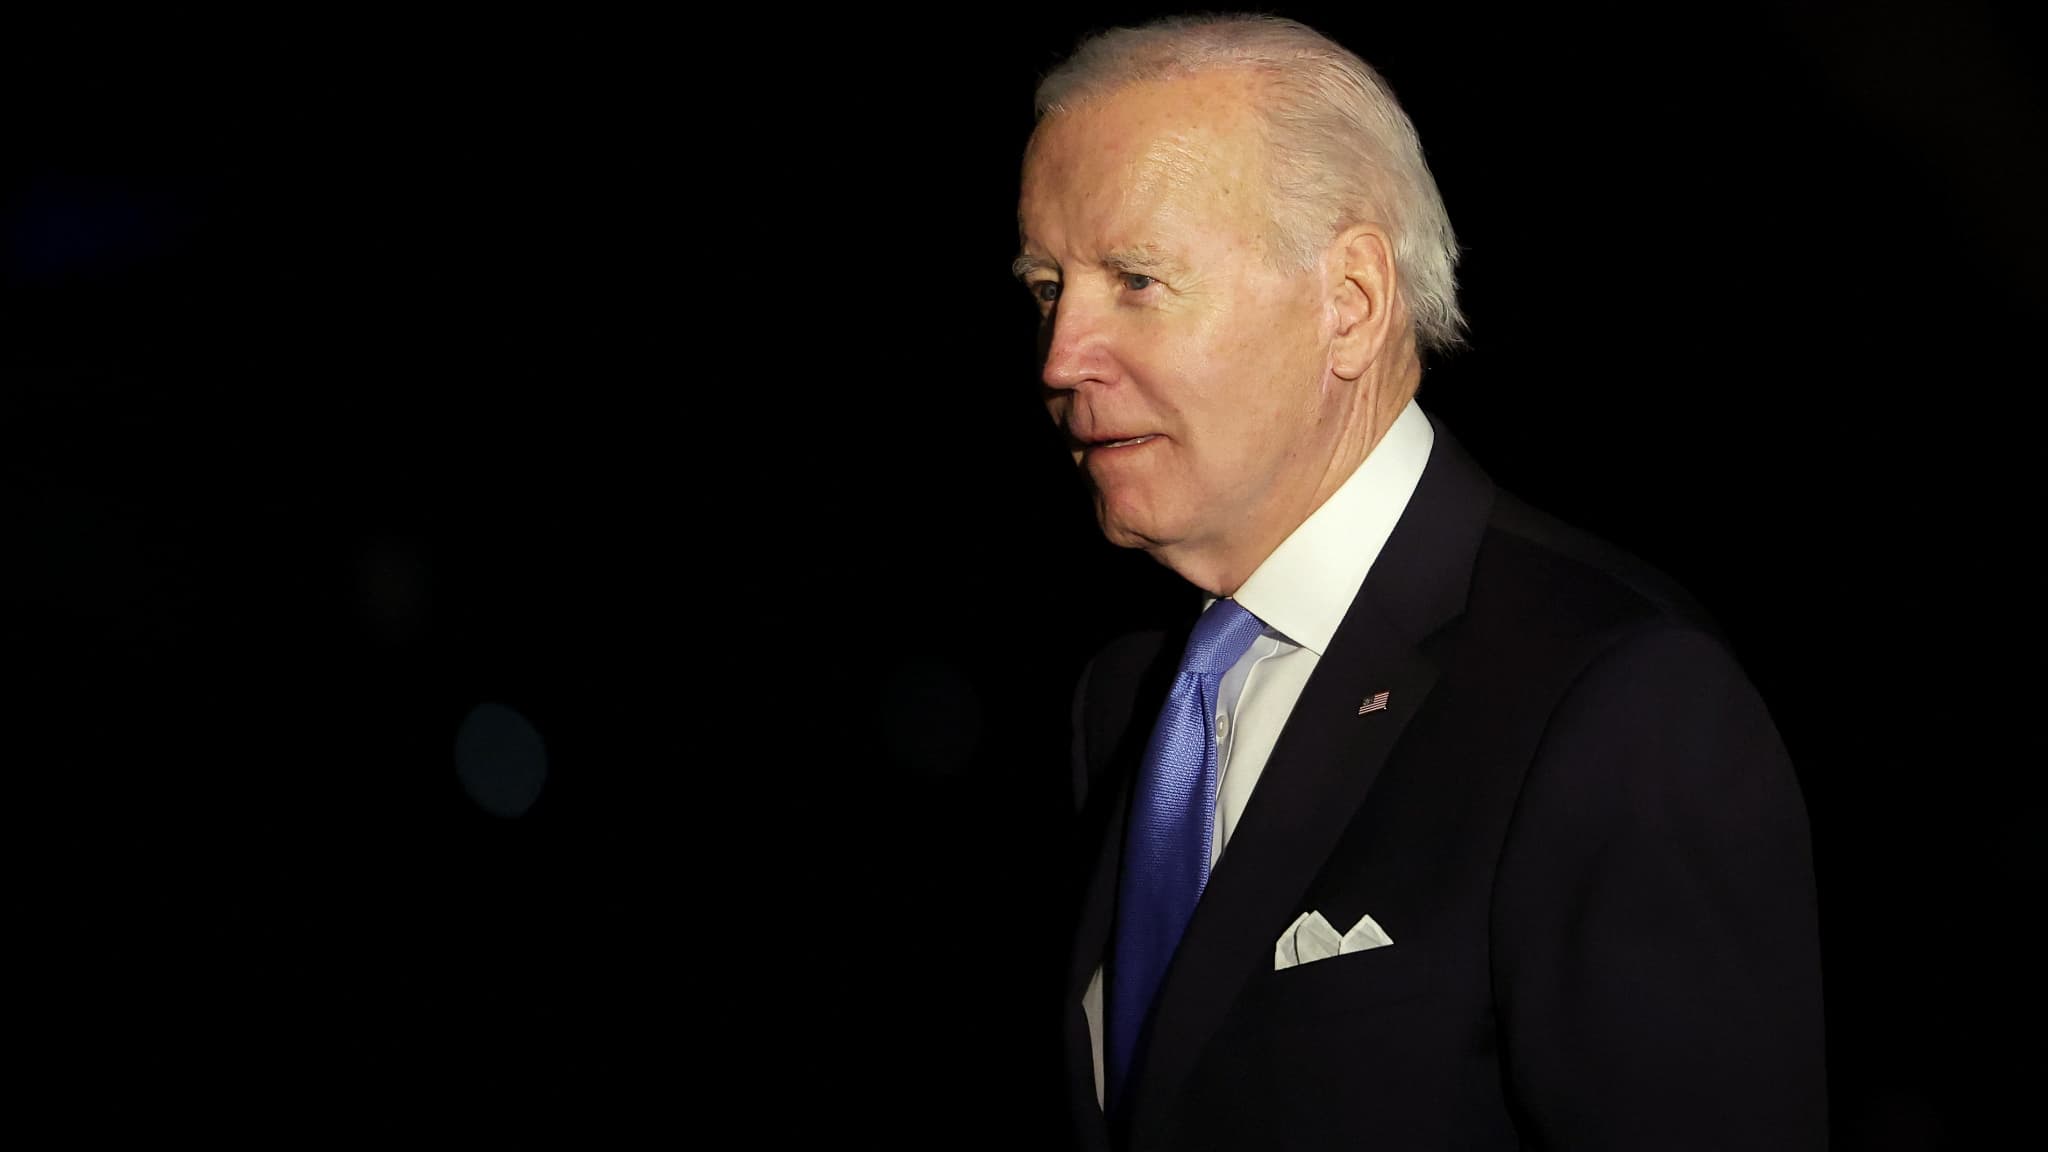 Joe Biden wants to announce his presidential candidacy in 2024, but not immediately